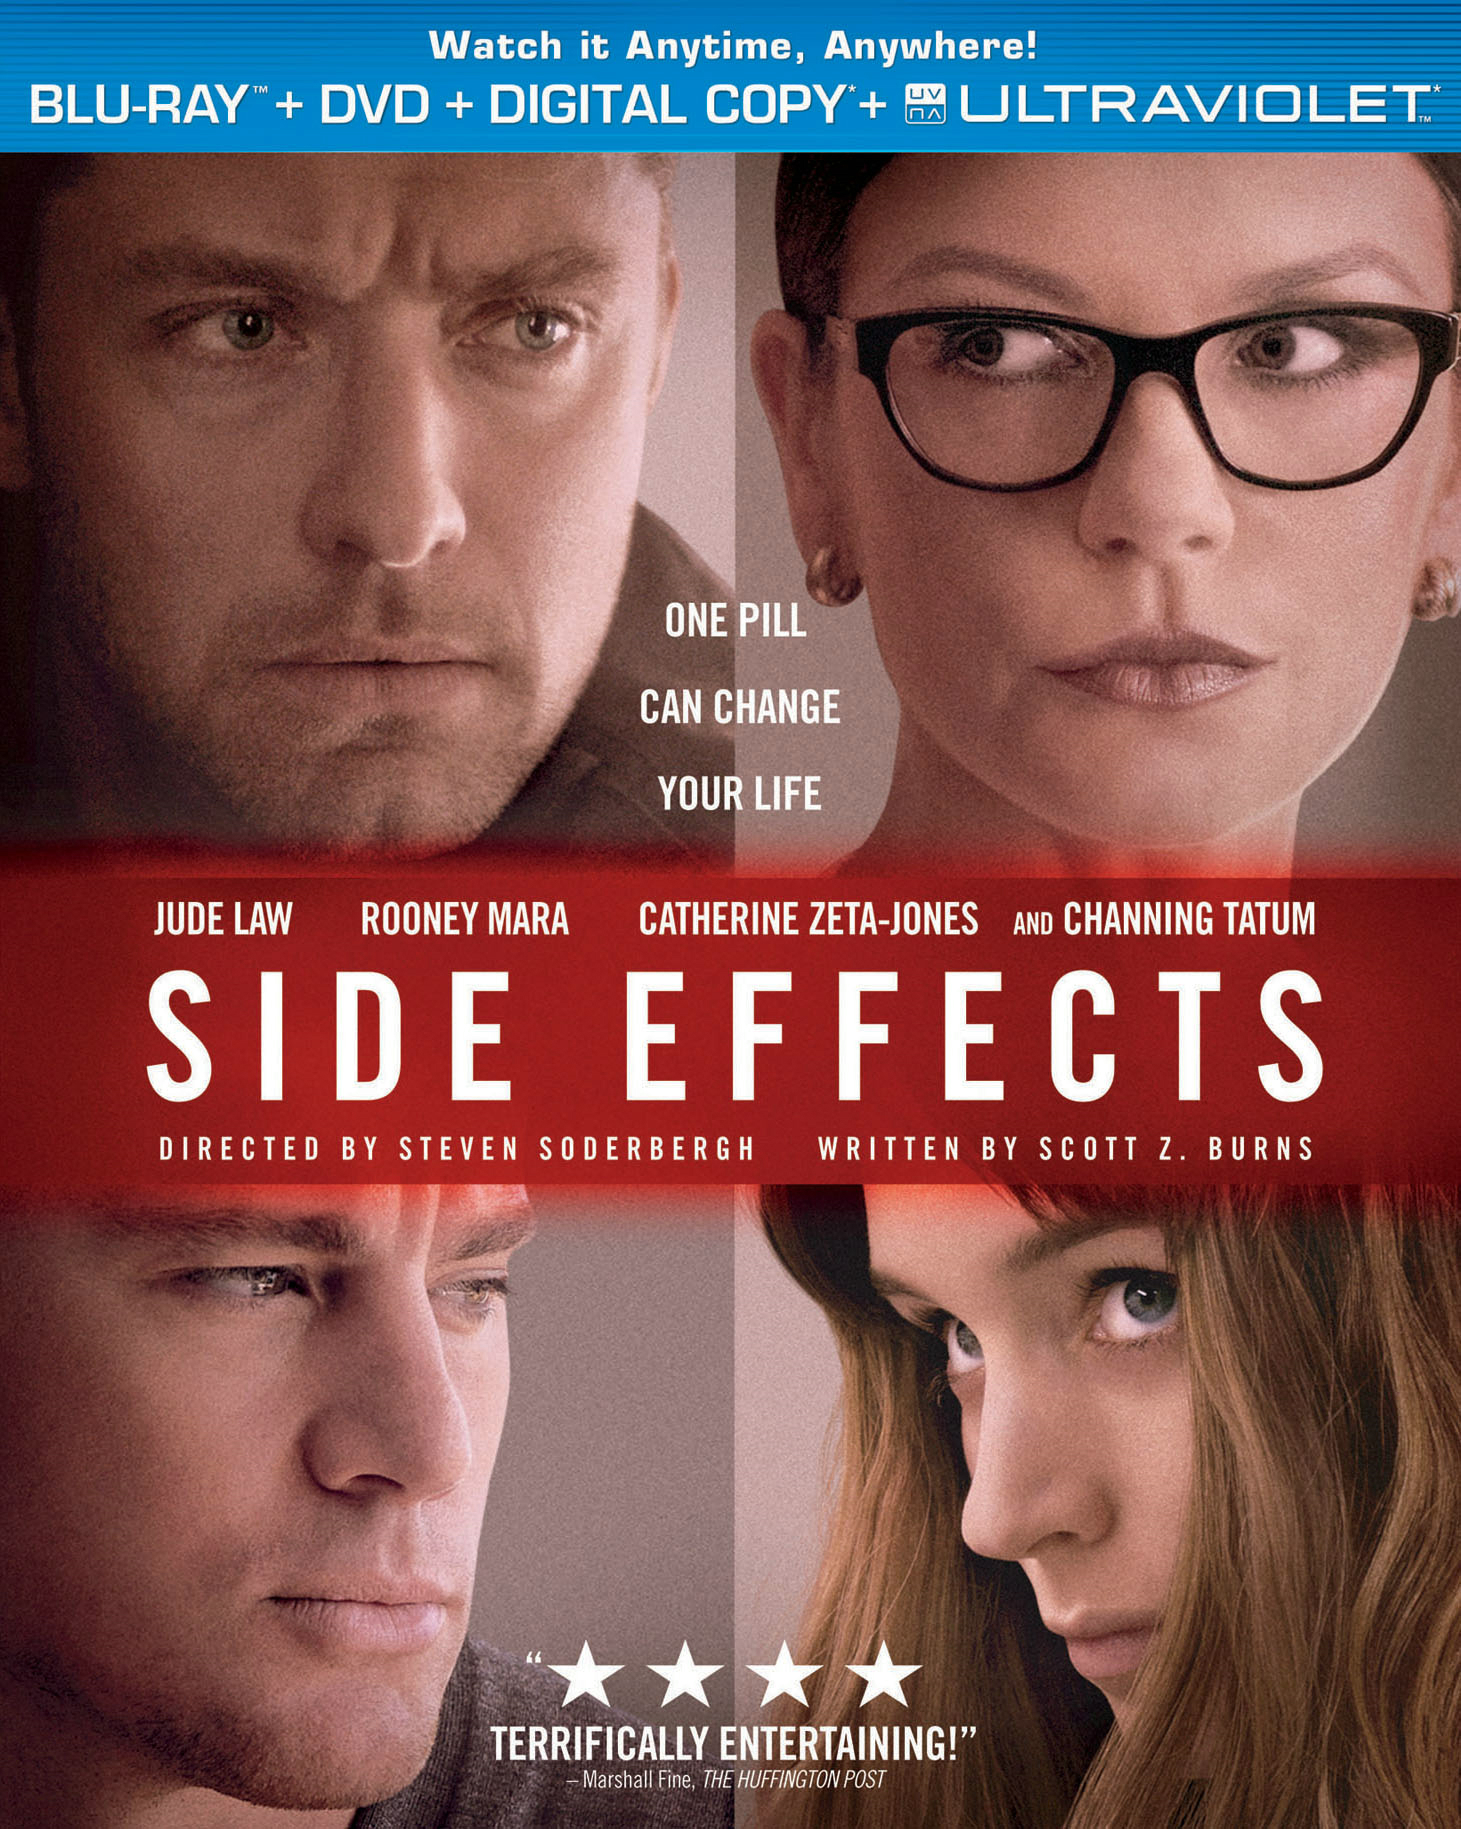 Side Effects (DVD) - Blu-ray [ 2013 ]  - Thriller Movies On Blu-ray - Movies On GRUV